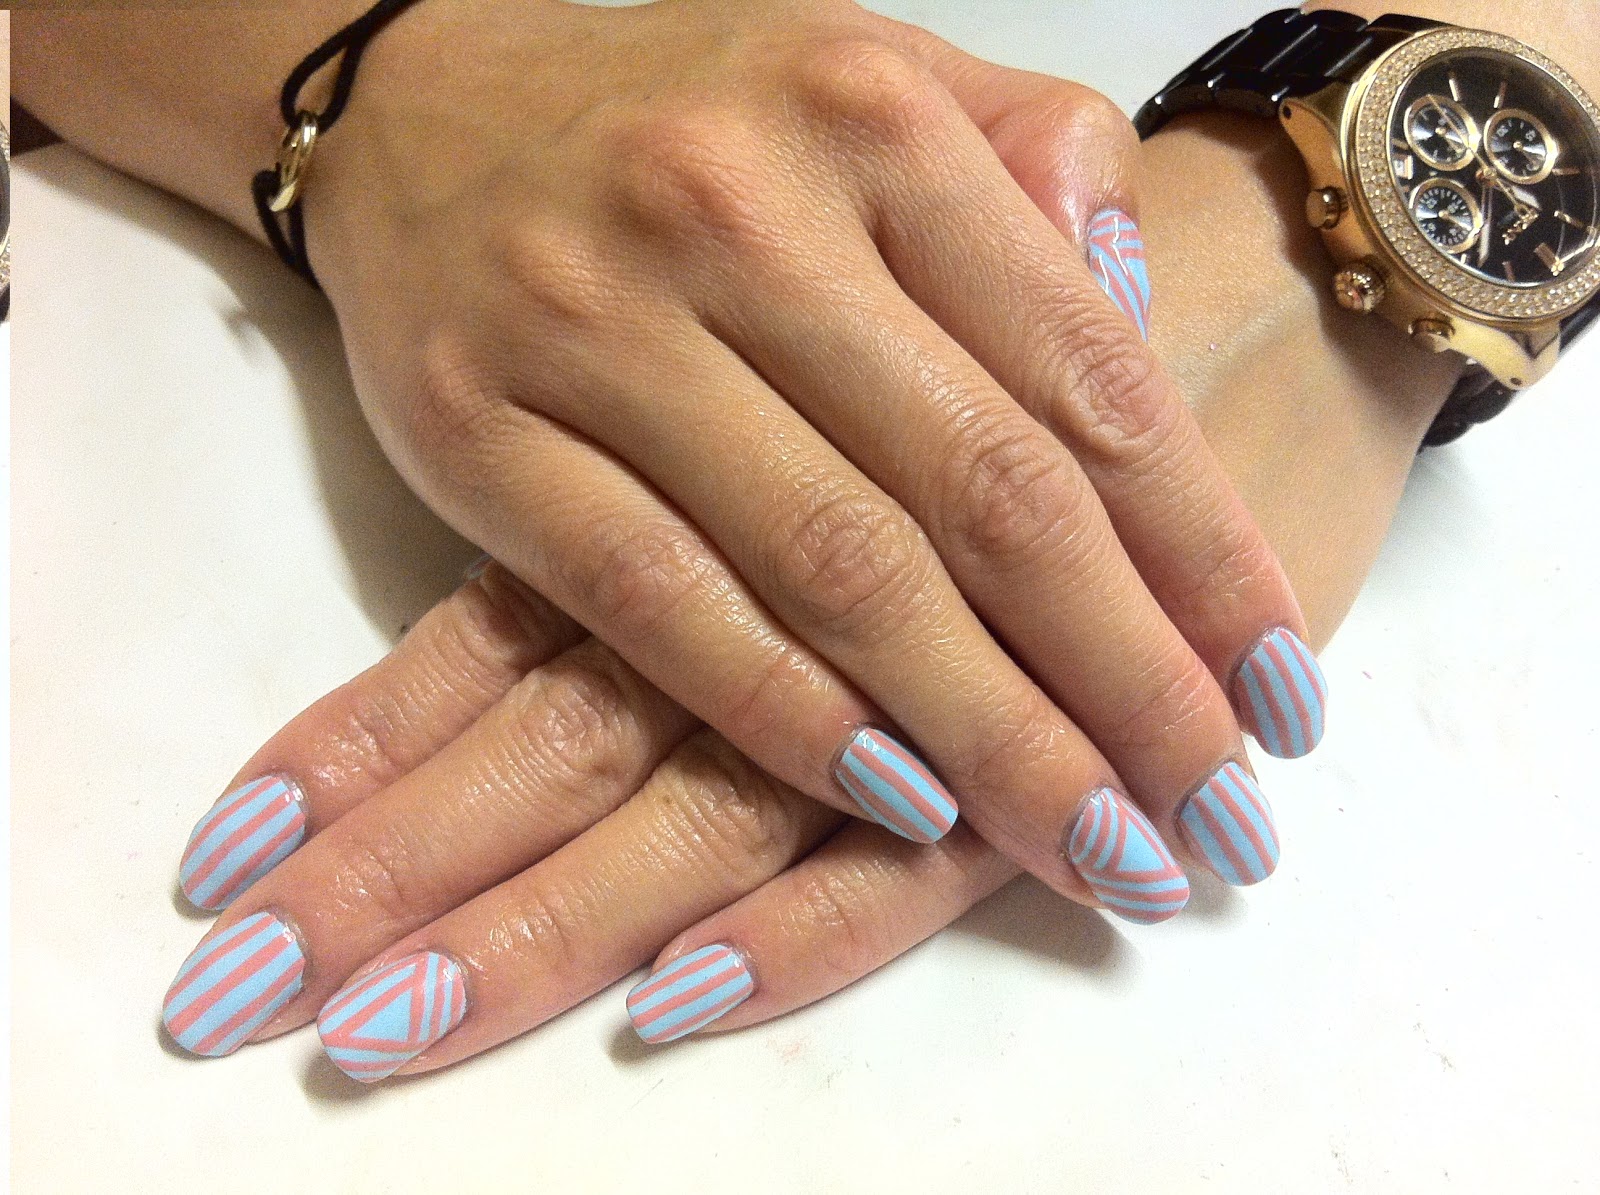 4. CND Shellac Nail Art Gallery - wide 3